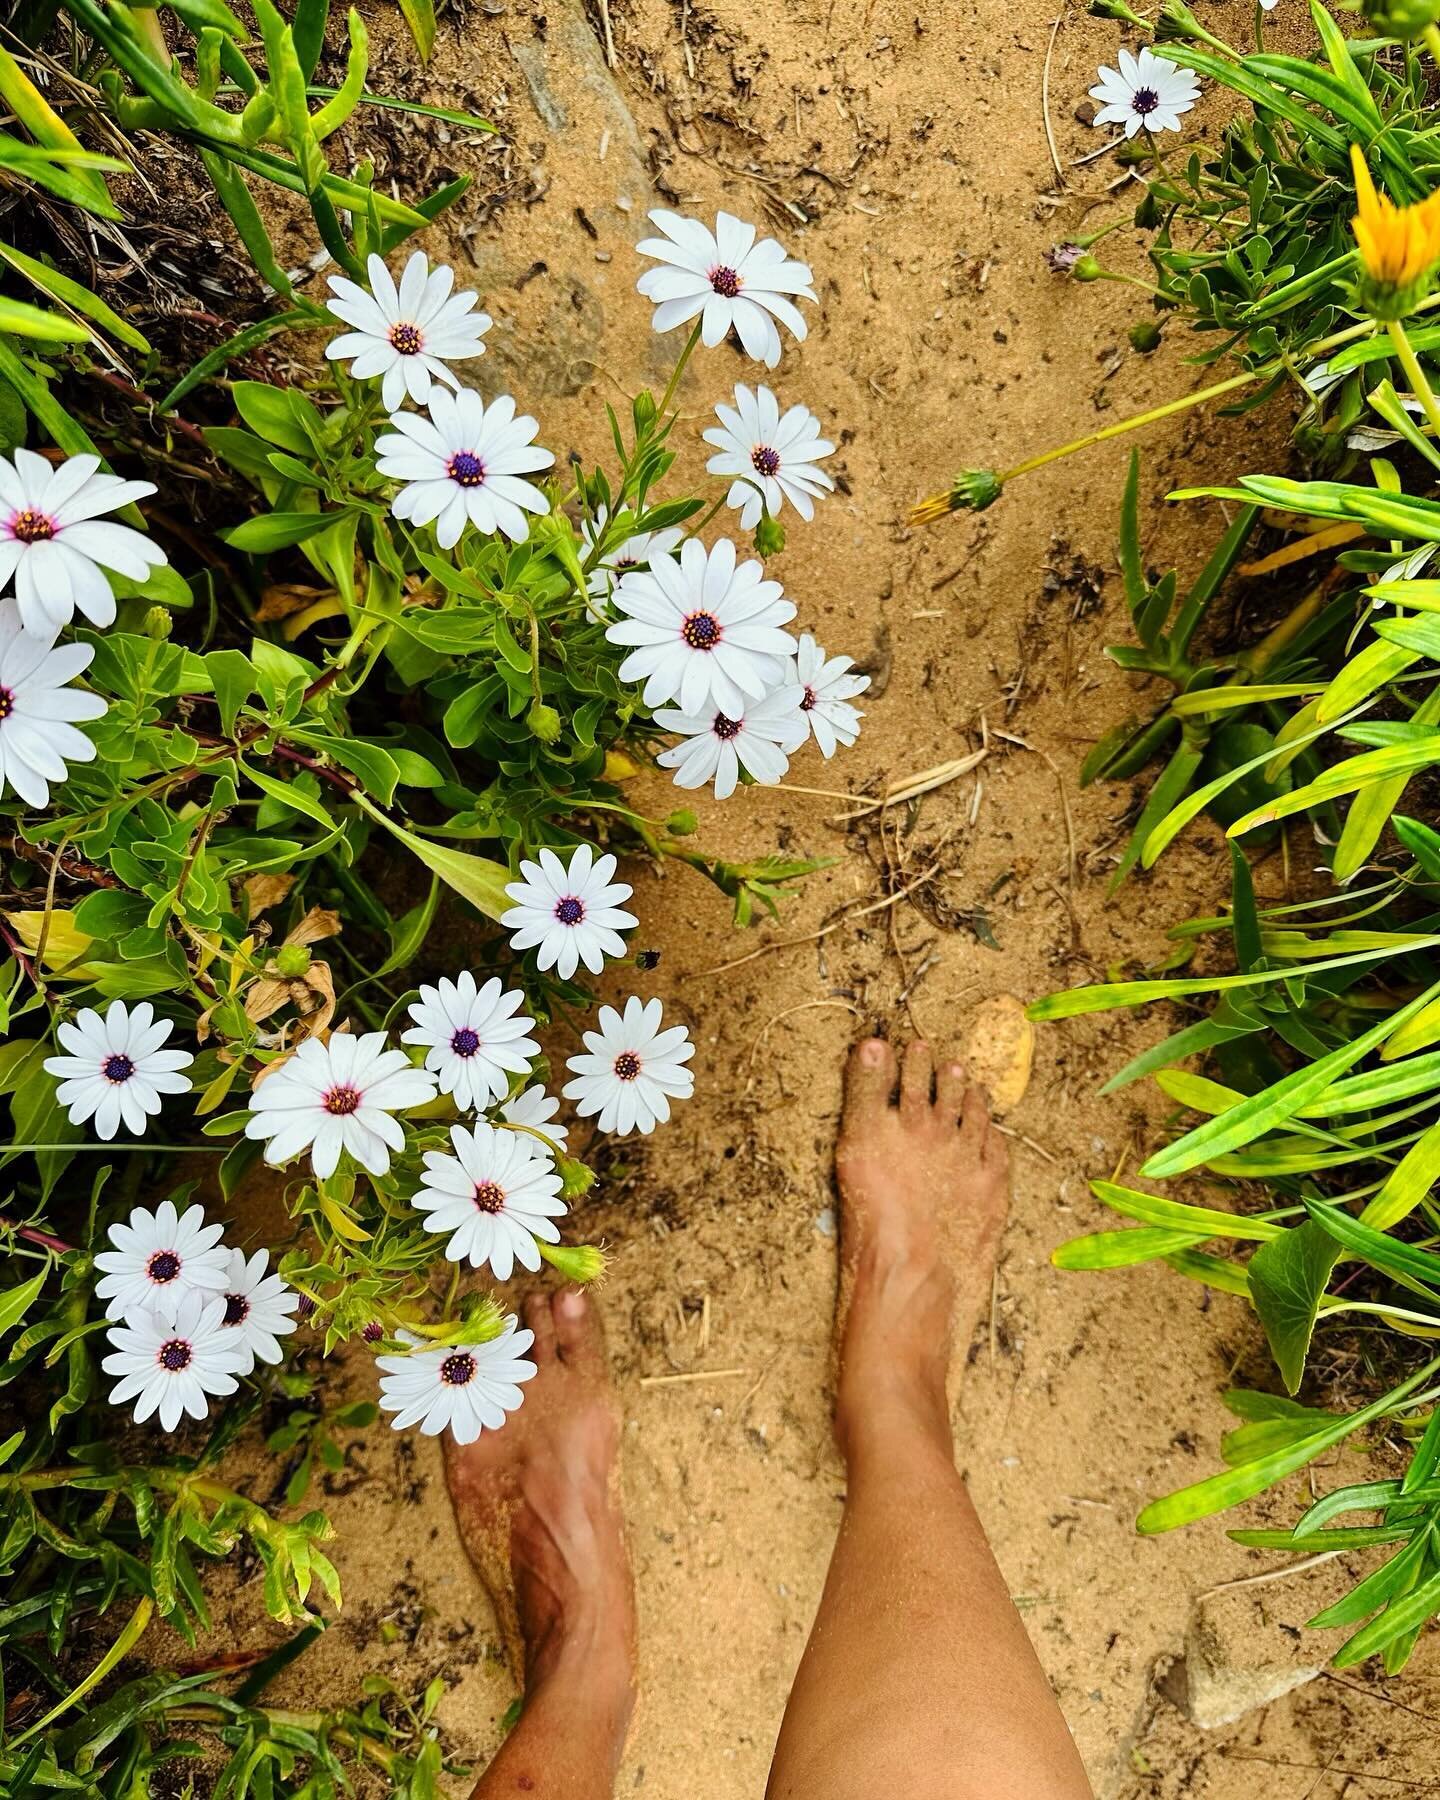 I am grateful for the sand beneath my feet.
The beauty of flowers.
The peace in a pause.
For love and life.

May you find your upward spiral 🙏